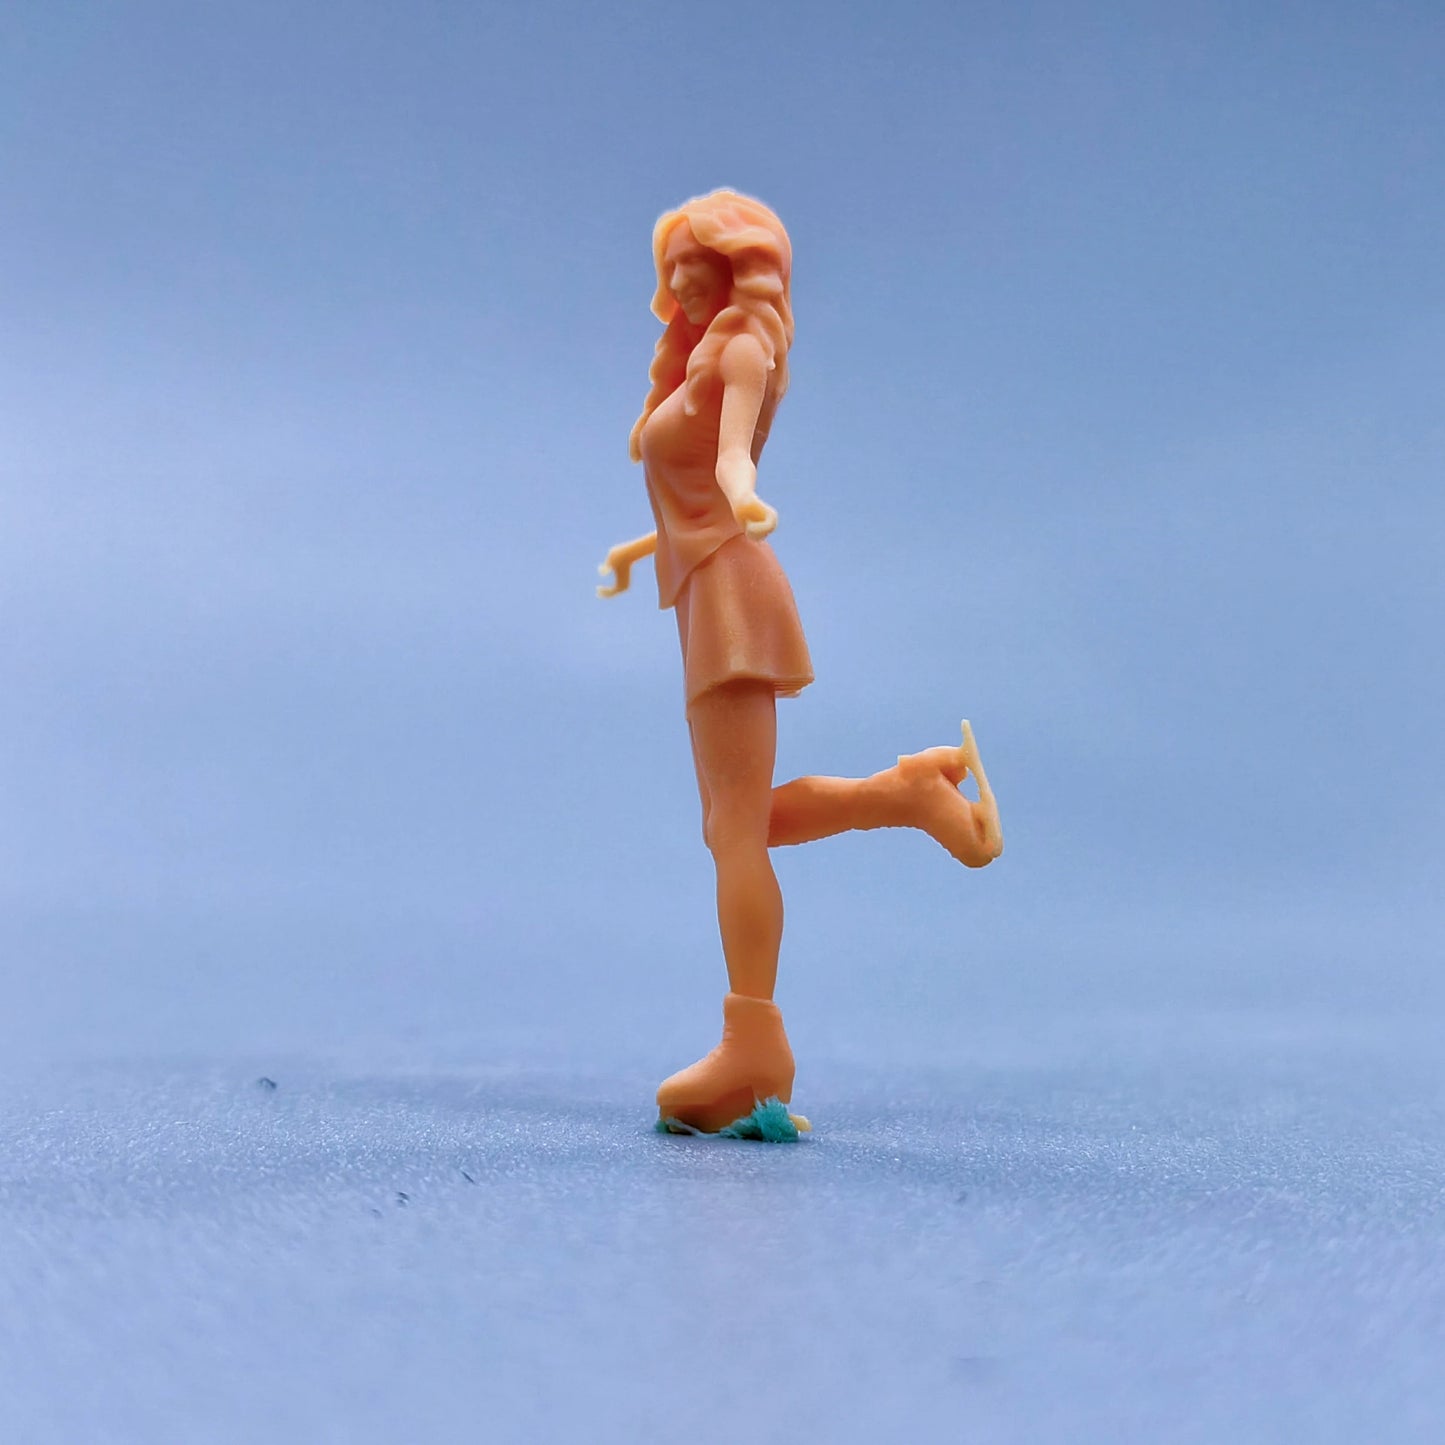 1/64 1/43 Figurines Scale Model Resin A Woman Wearing Ice Skates Uncolored Miniatures Diorama Hand-painted L226